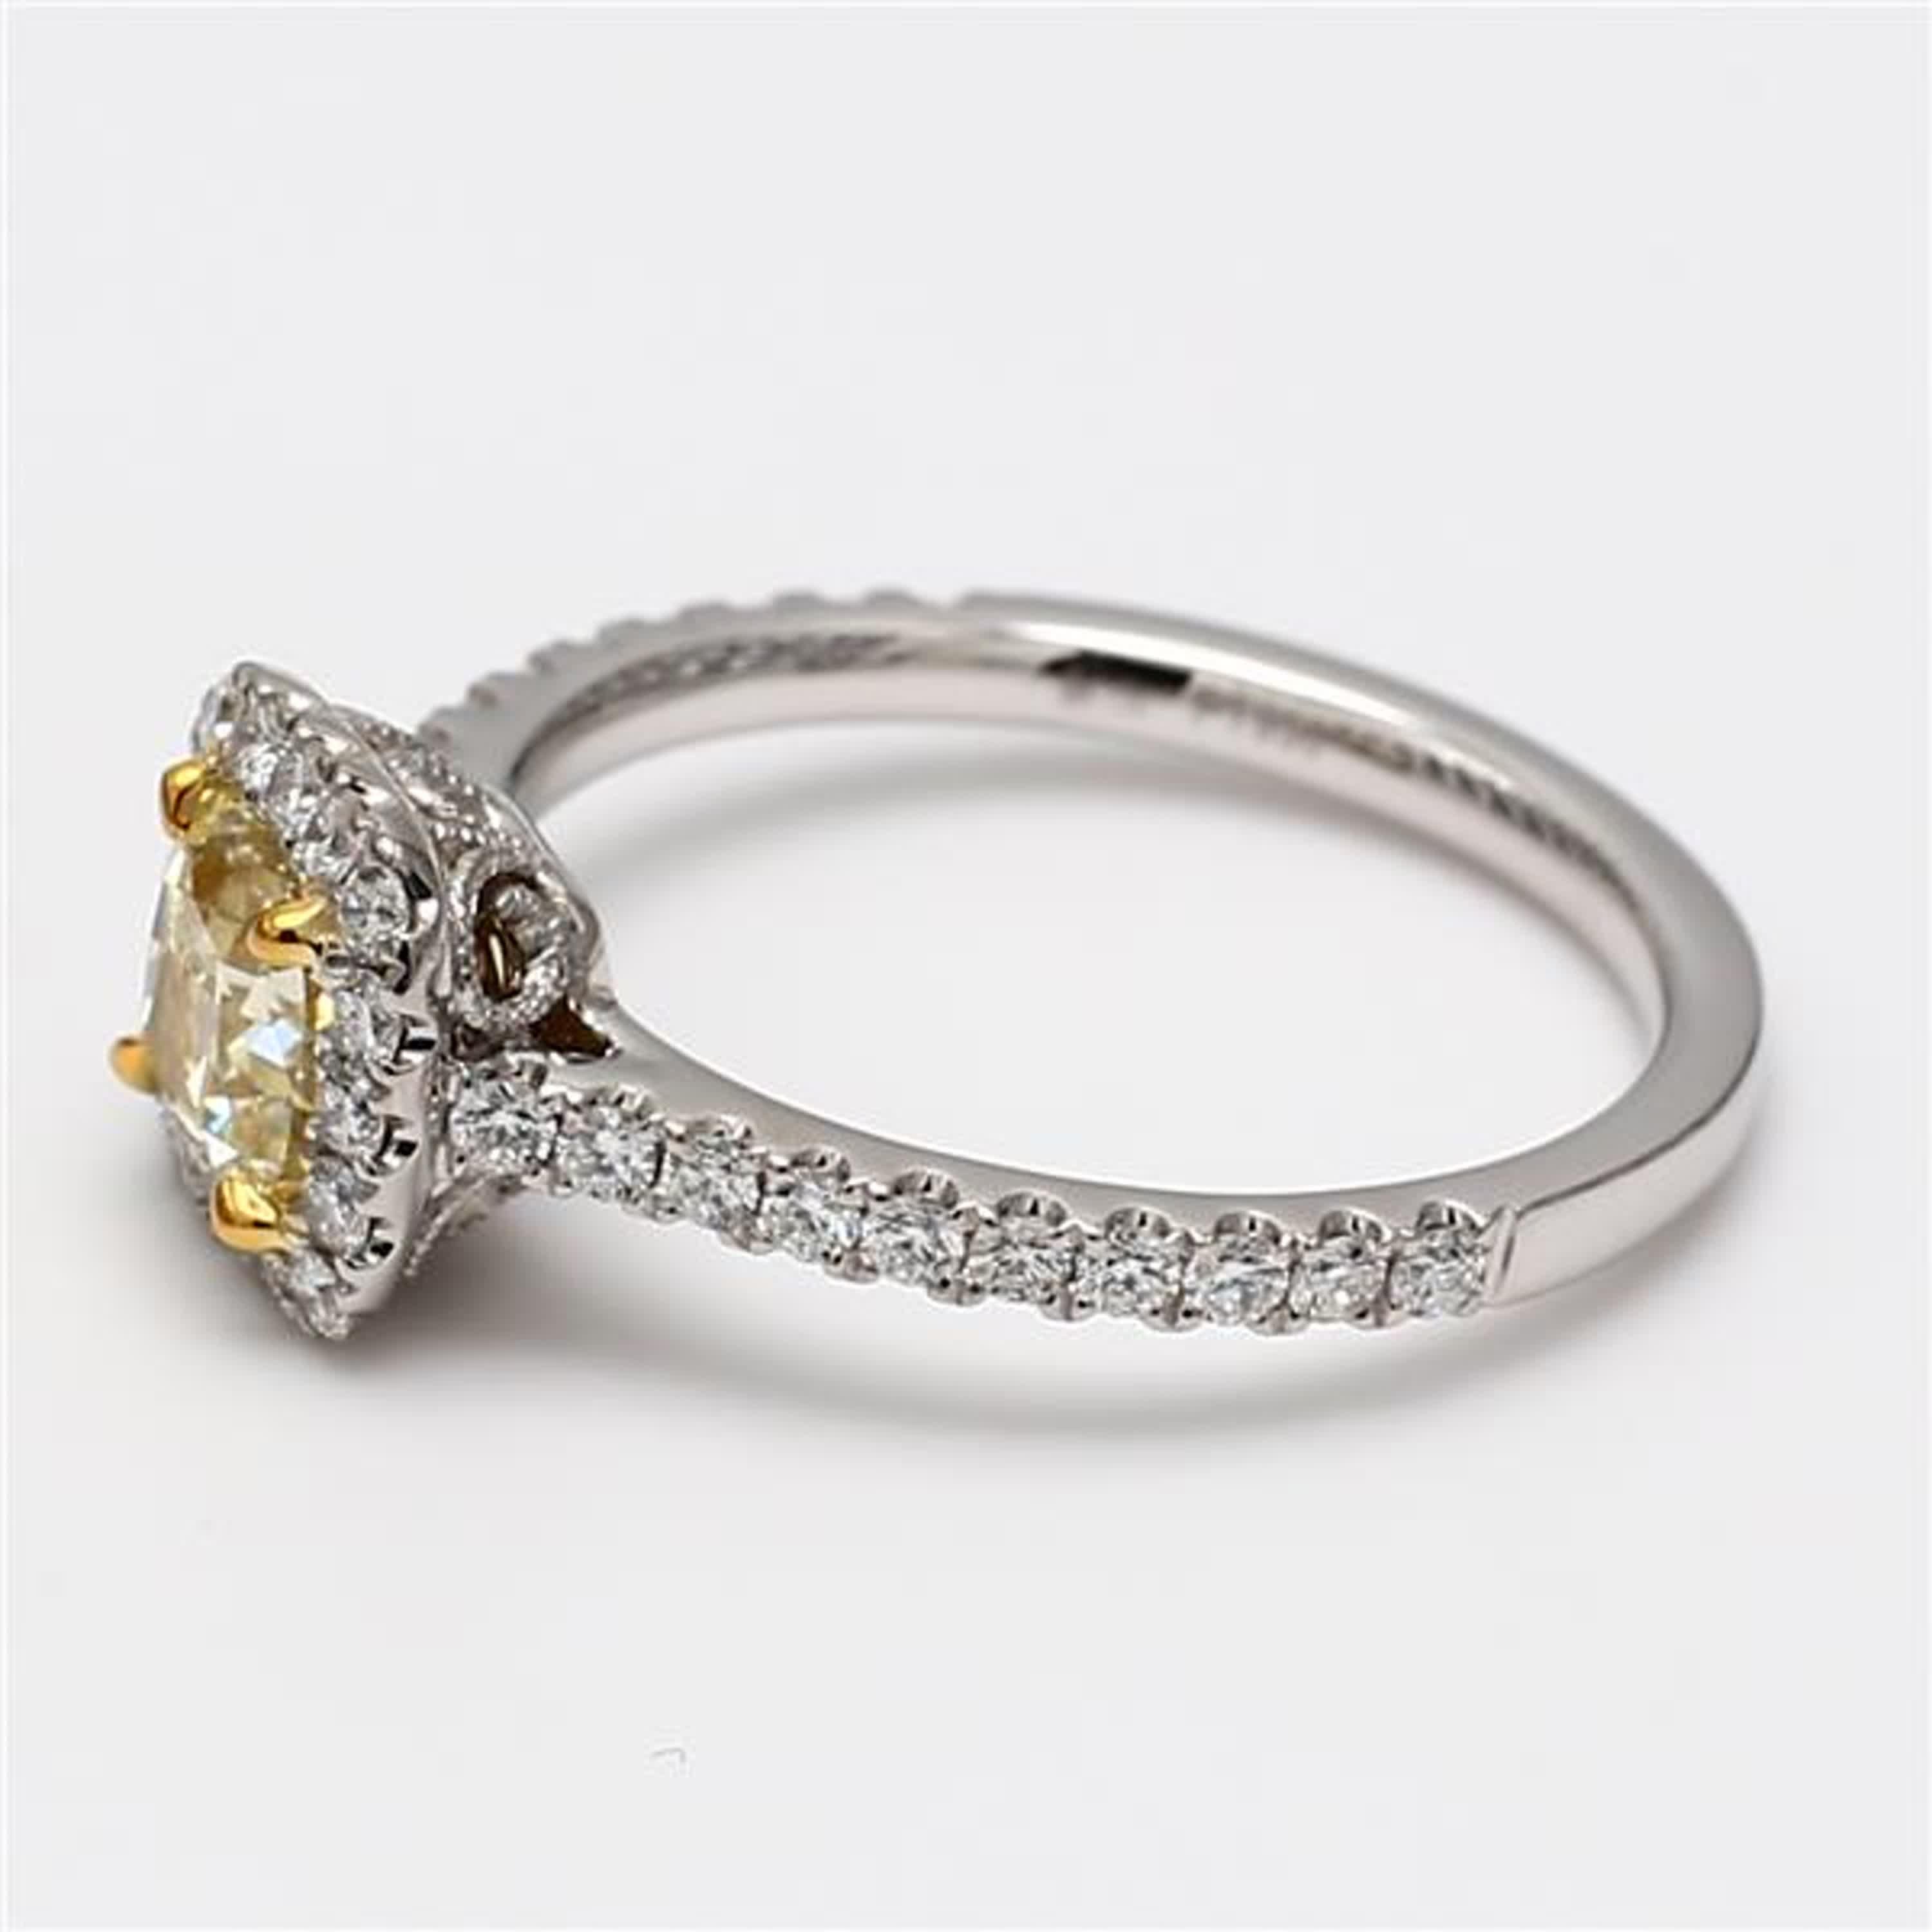 Contemporary GIA Certified Natural Yellow Cushion Diamond 1.47 Carat TW Plat Cocktail Ring